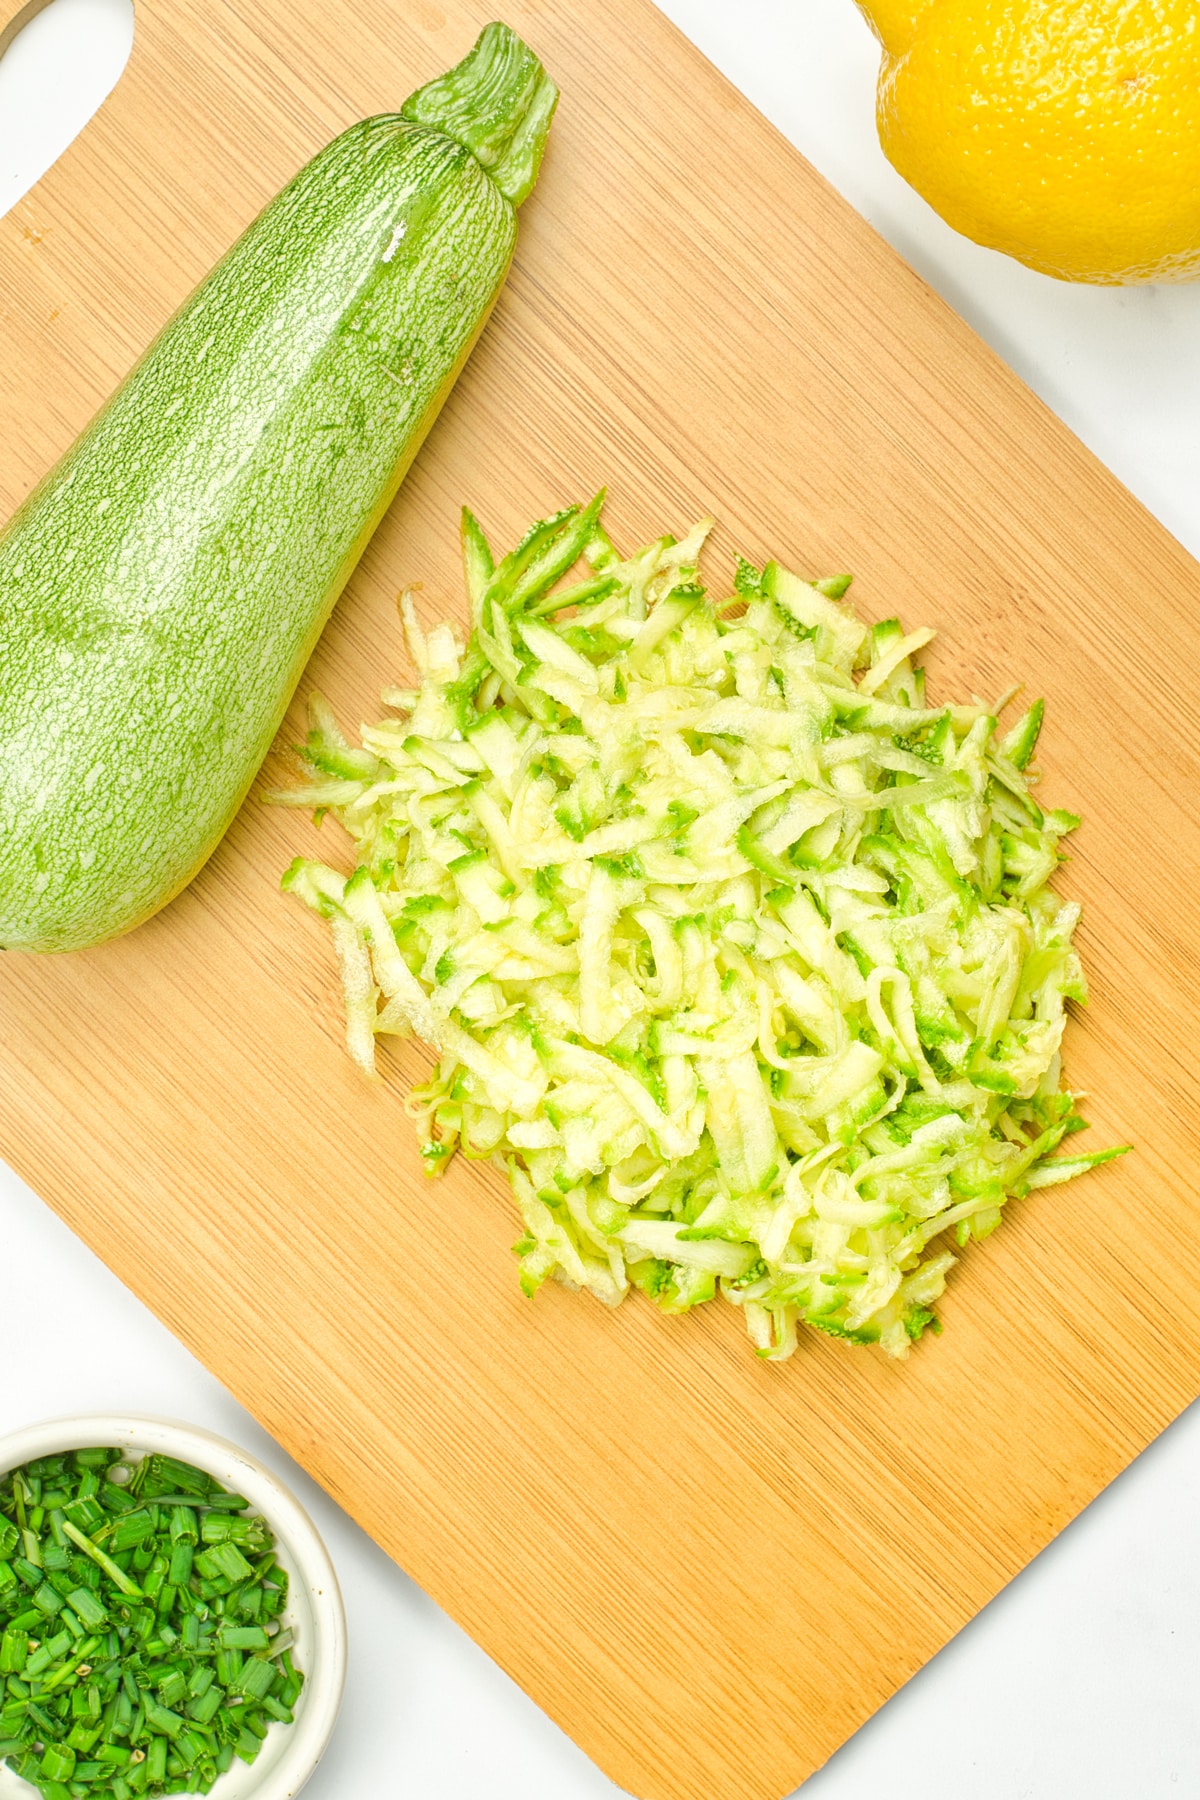 Grated Zucchini on a wooden board for Zucchini Fritters recipe